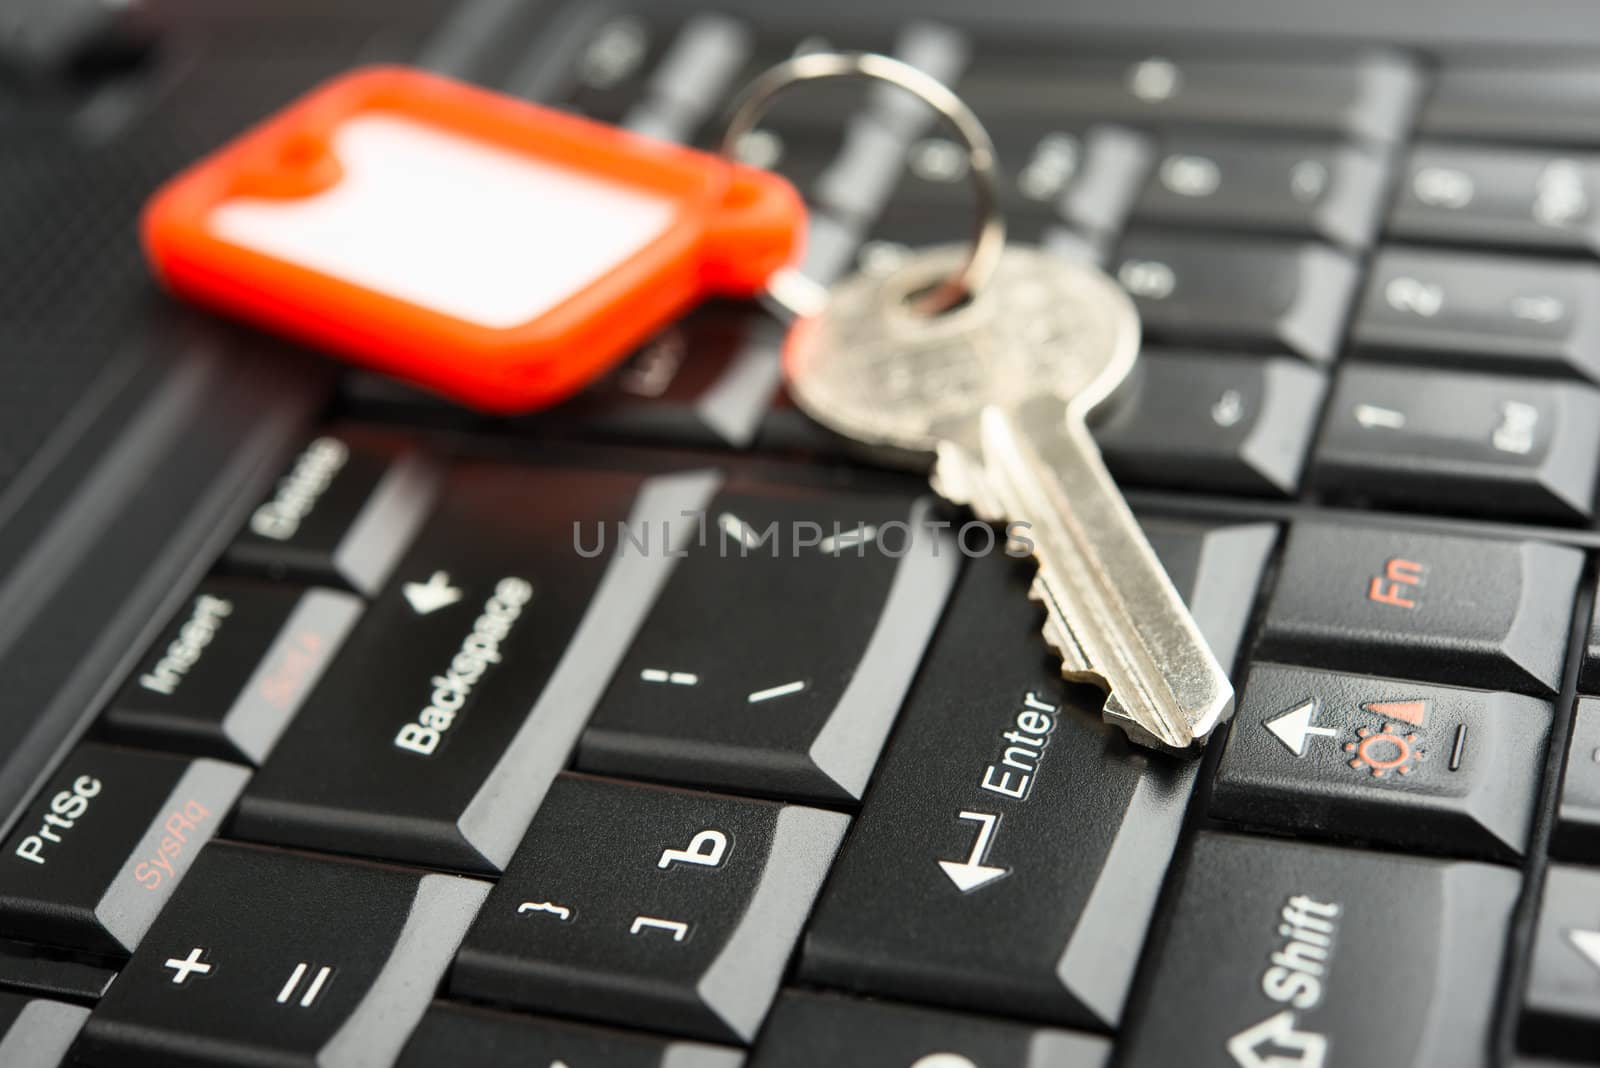 key on laptop keyboard with shallow depth of field